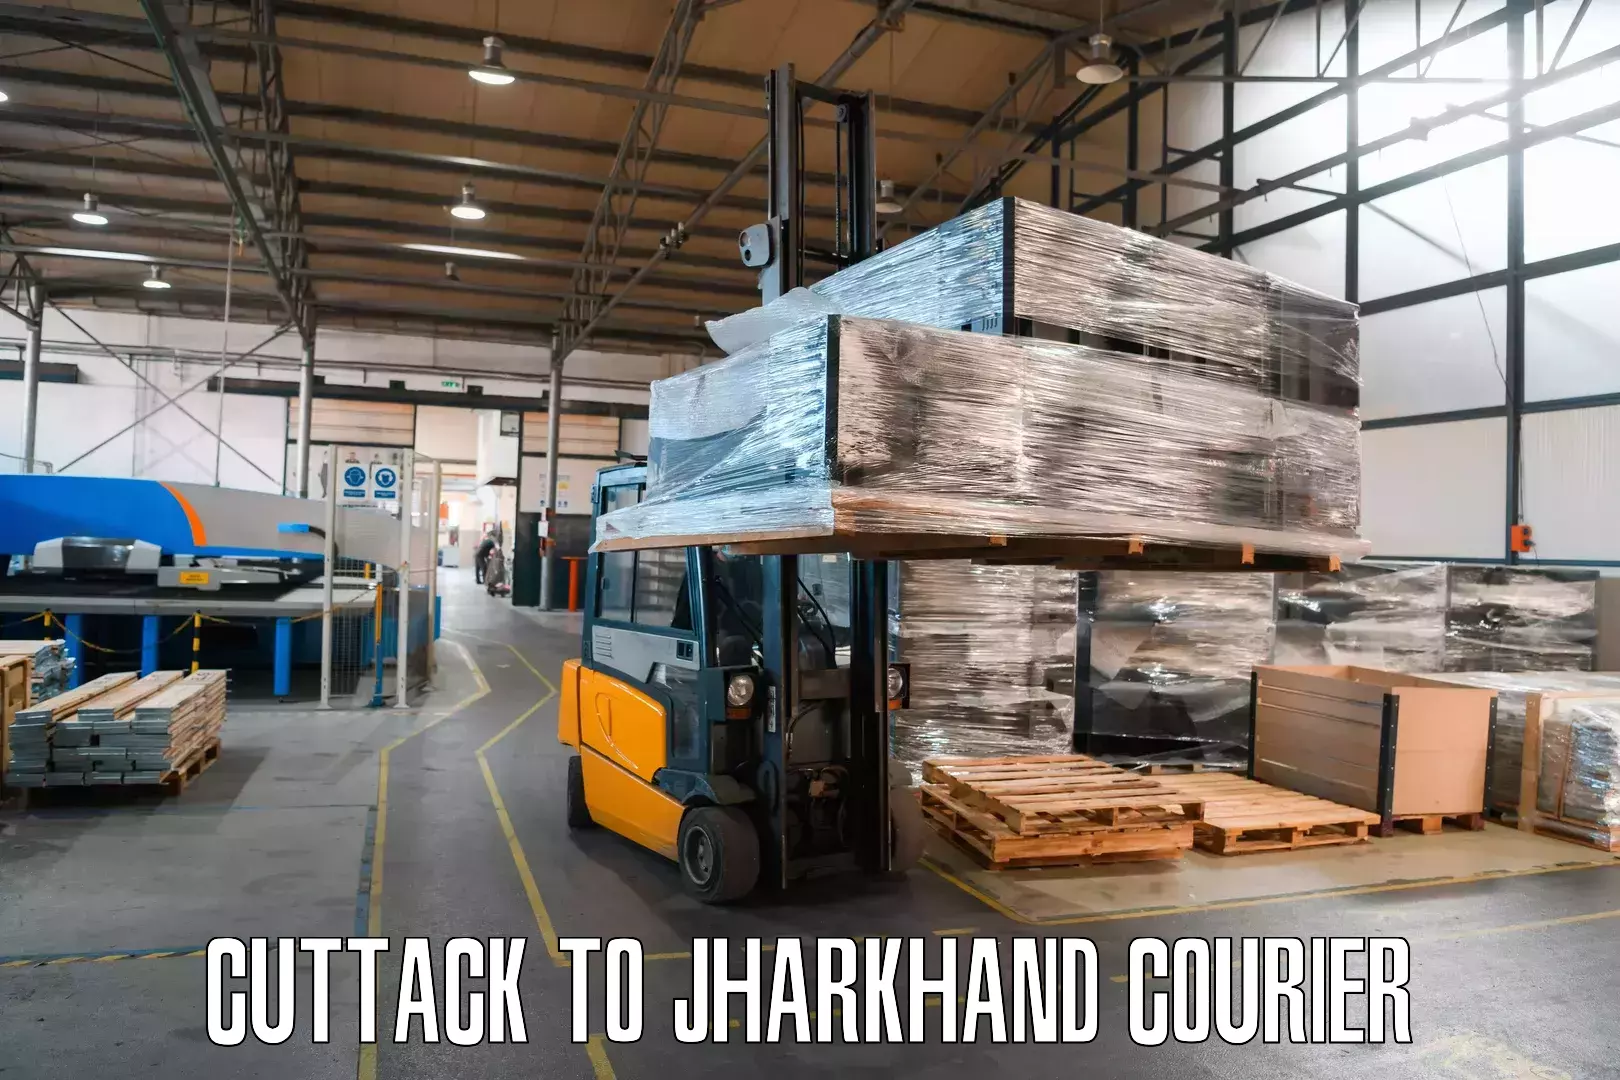 State-of-the-art courier technology Cuttack to Ranchi